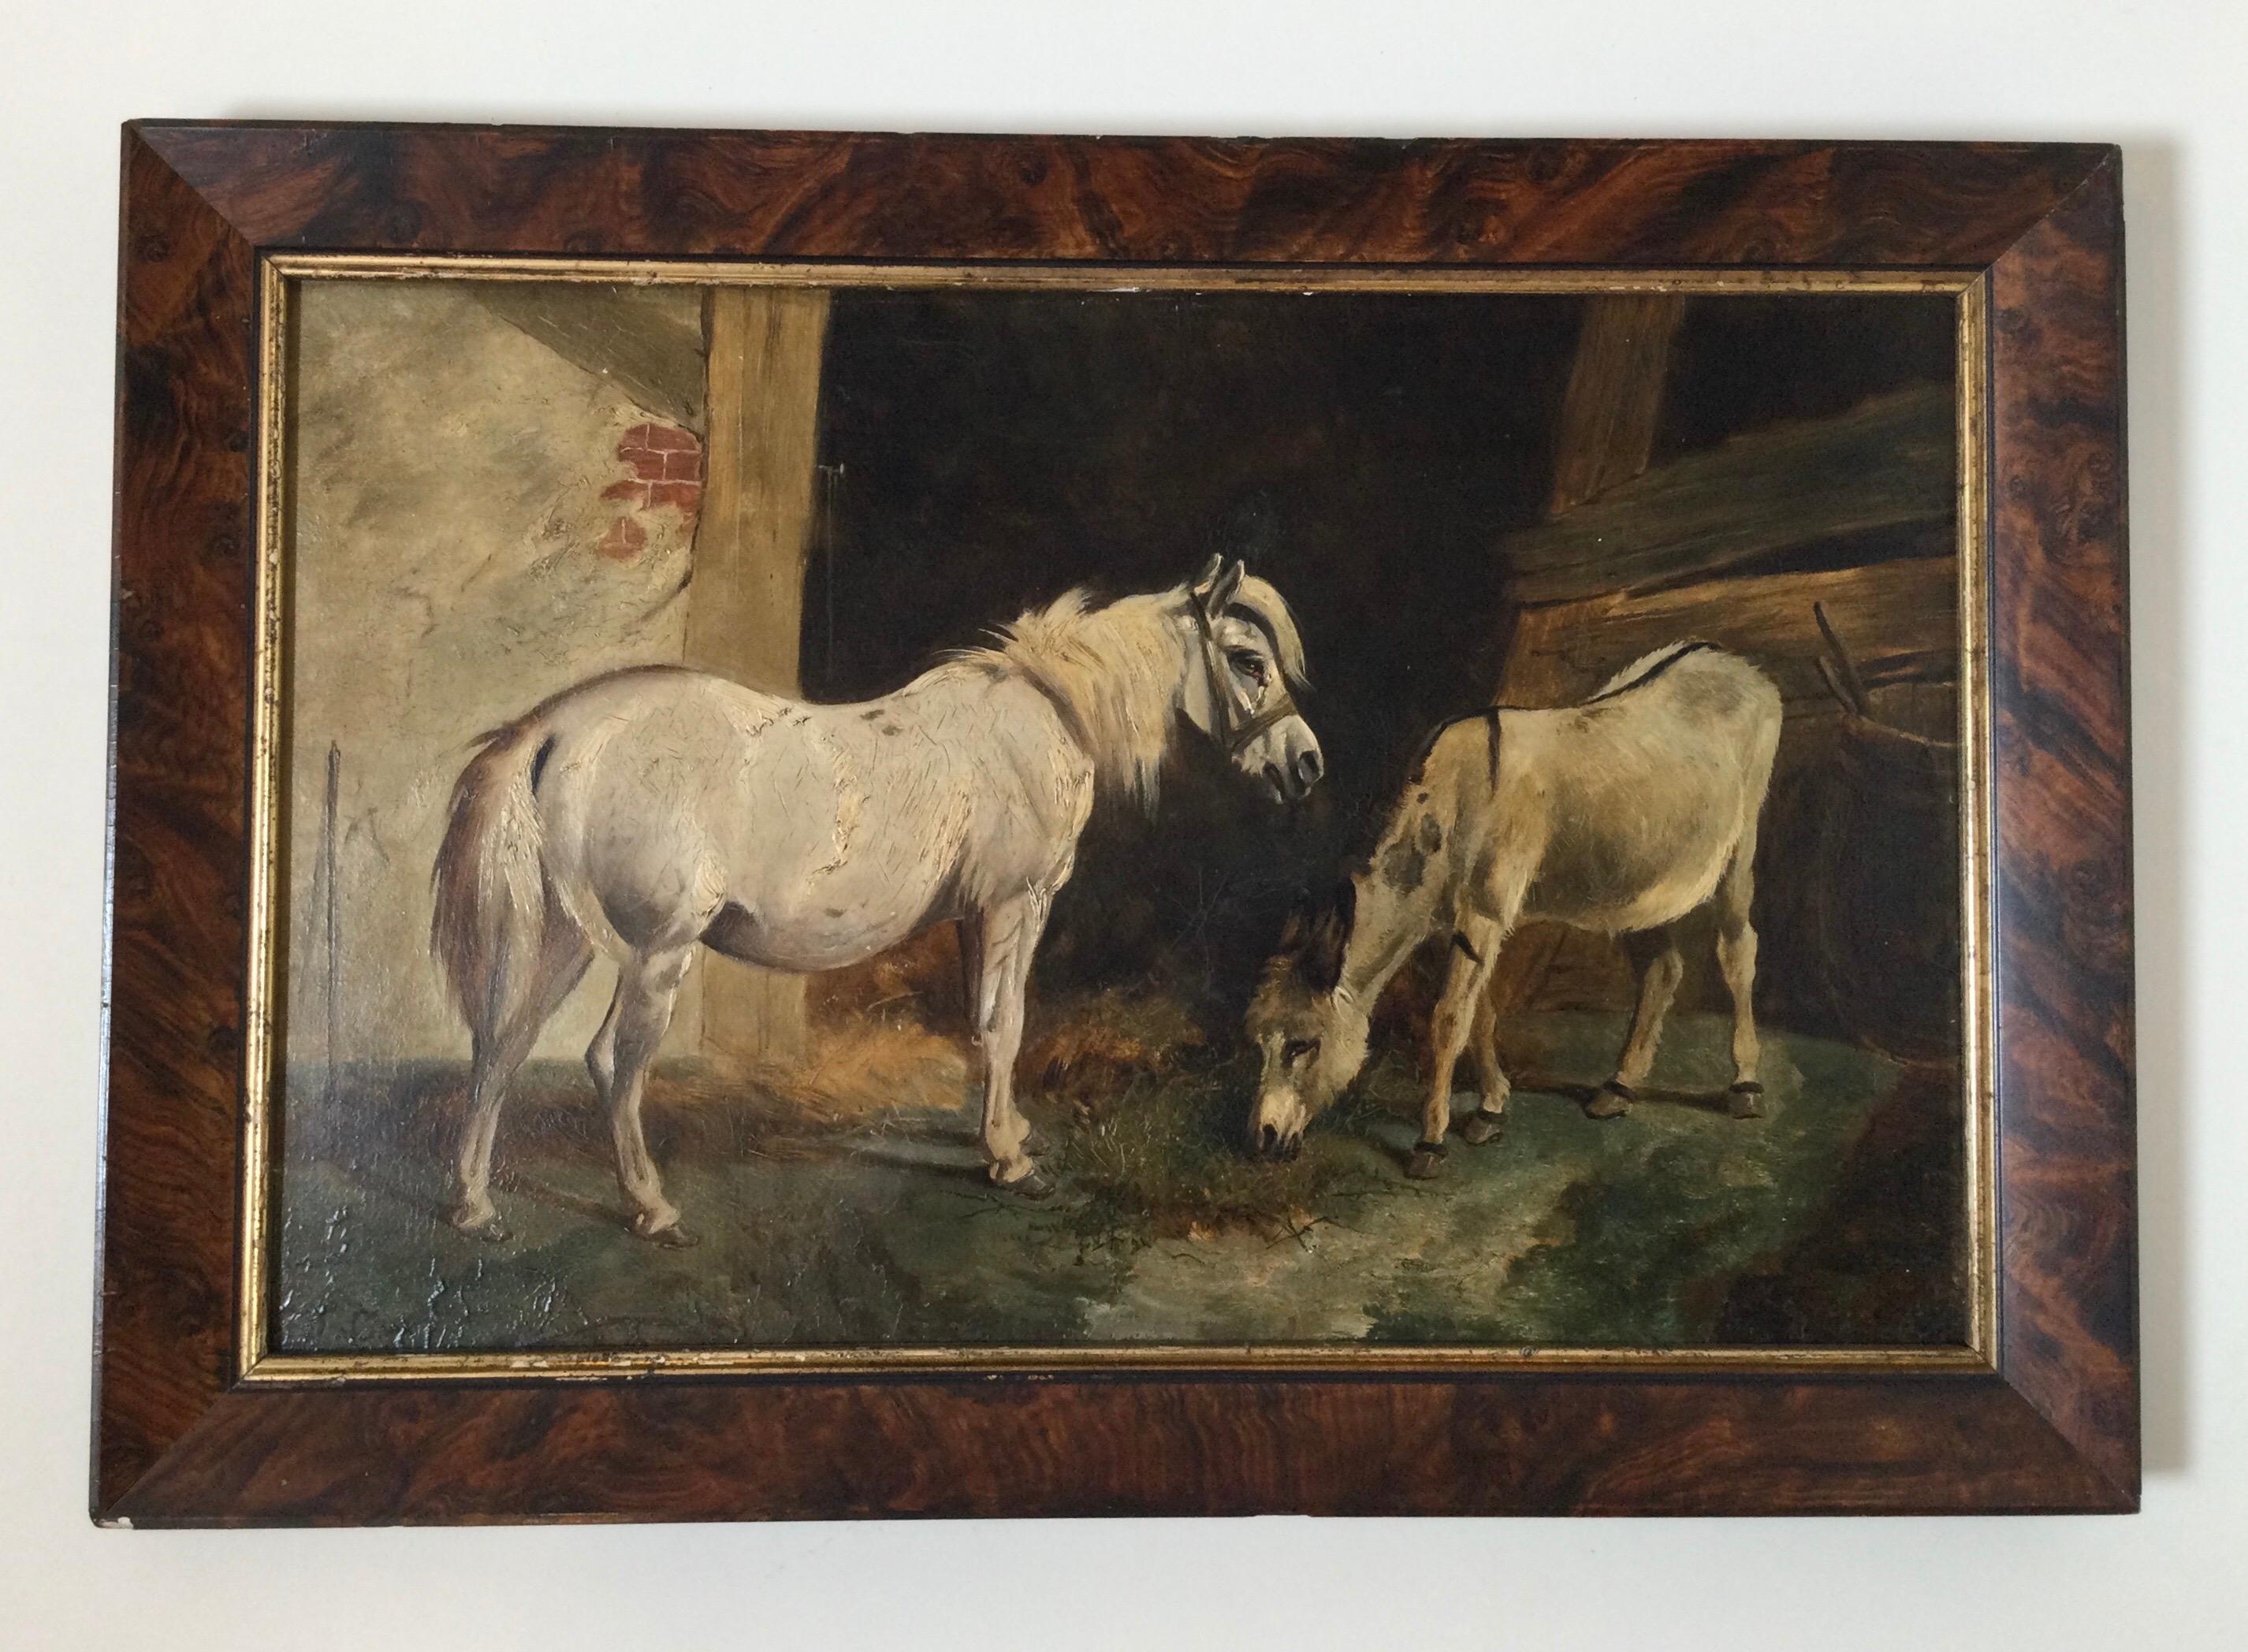 Stable scene oil painting on board, late 19th century. Interesting background with money and donkey. Measures: 21 1/2